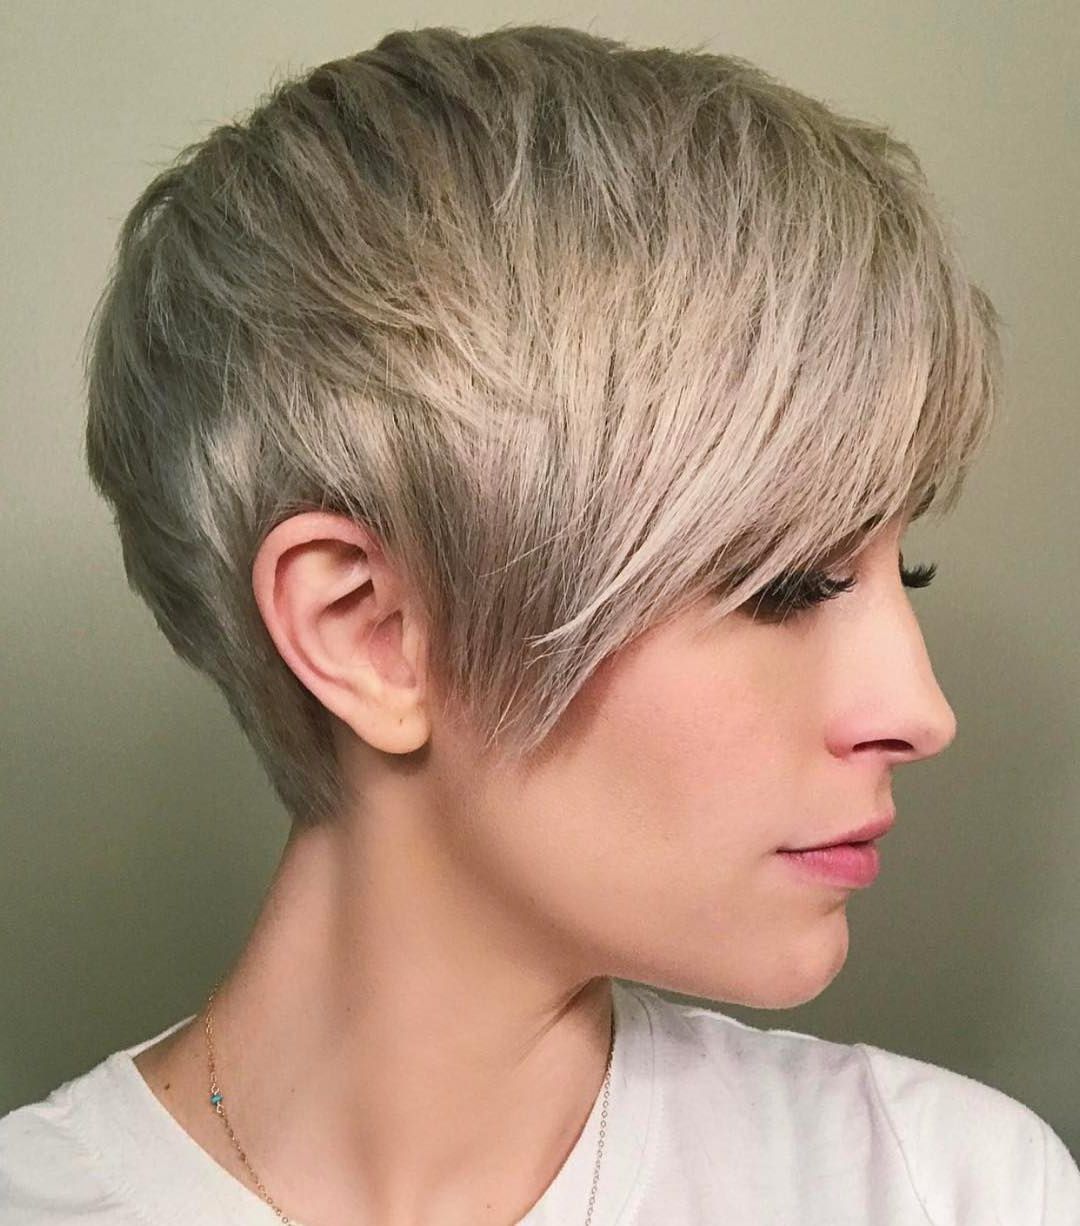 10 Best Short Straight Hairstyle Trends – Women Short Haircut Ideas 2018 For Cool Hairstyles For Short Hair Girl (View 9 of 25)